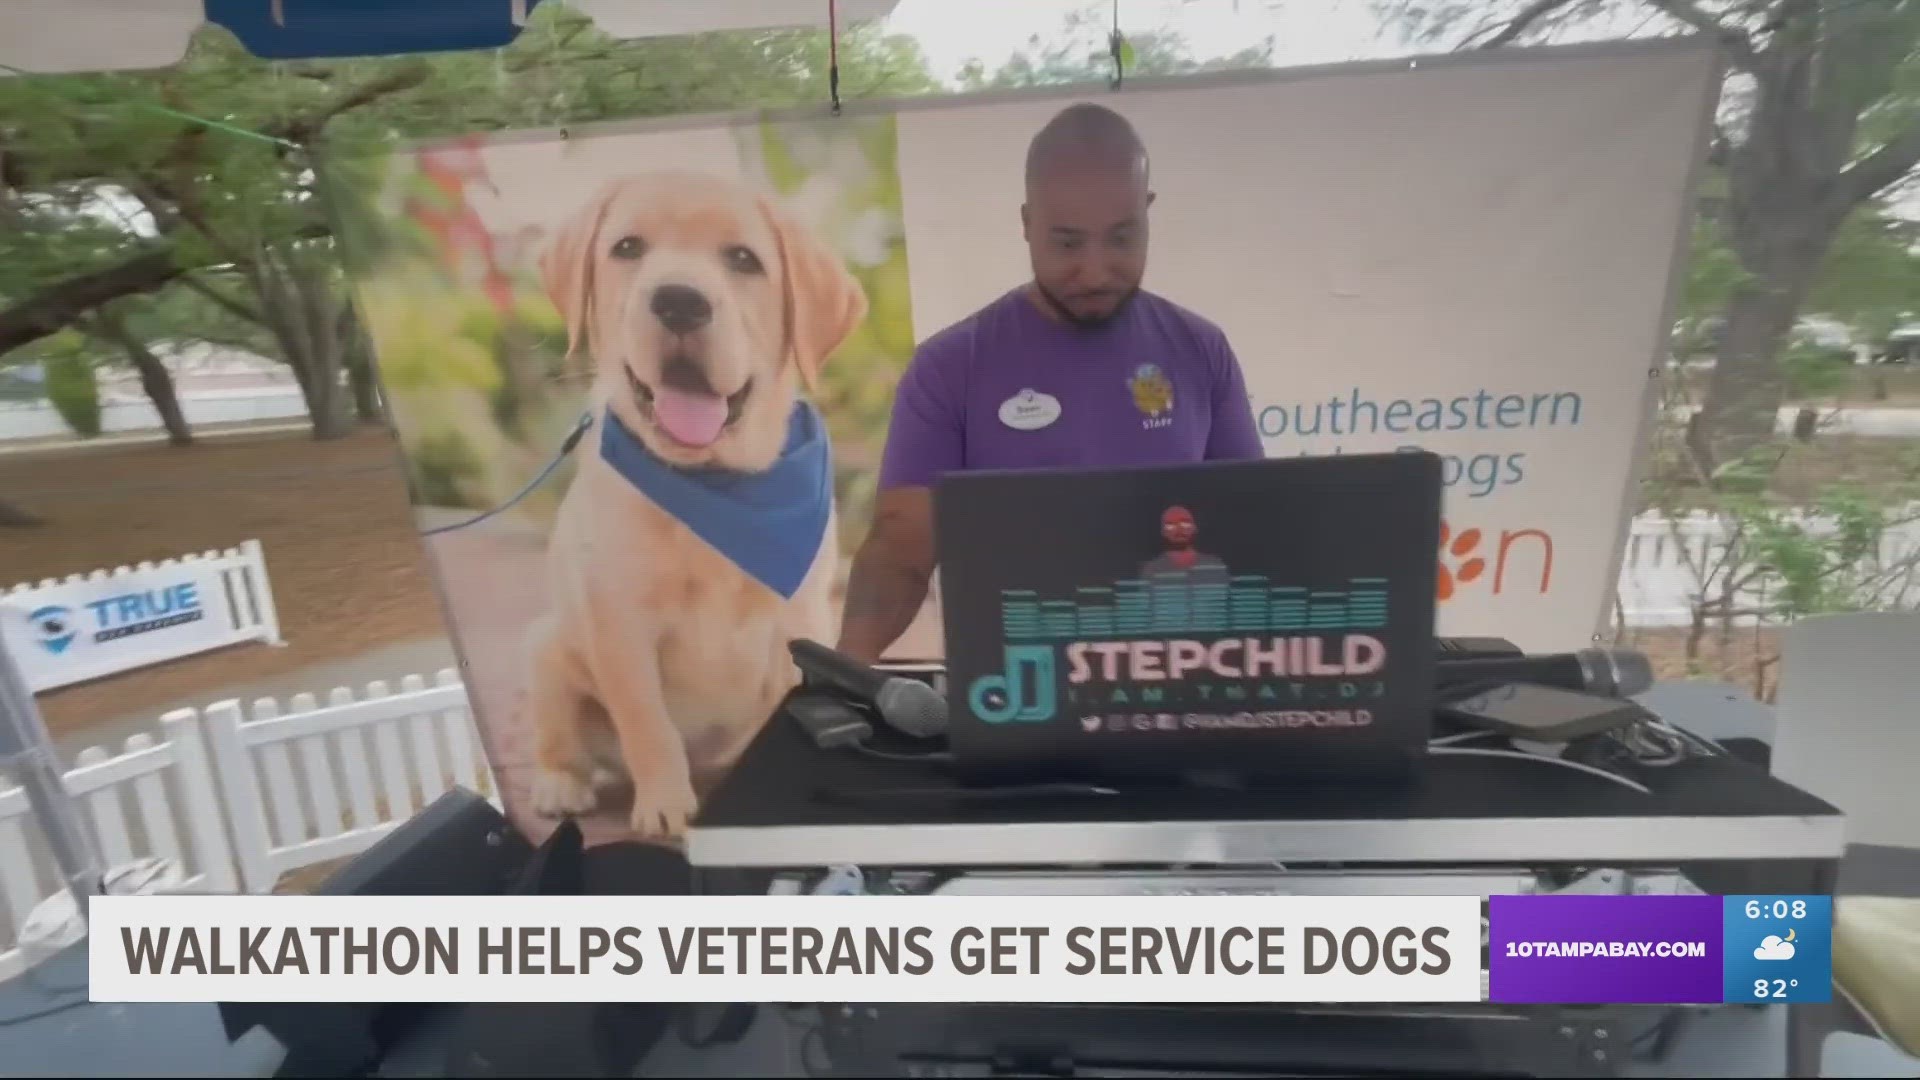 Southeastern Guide Dogs has paired thousands of veterans with guide and service dogs free of charge.